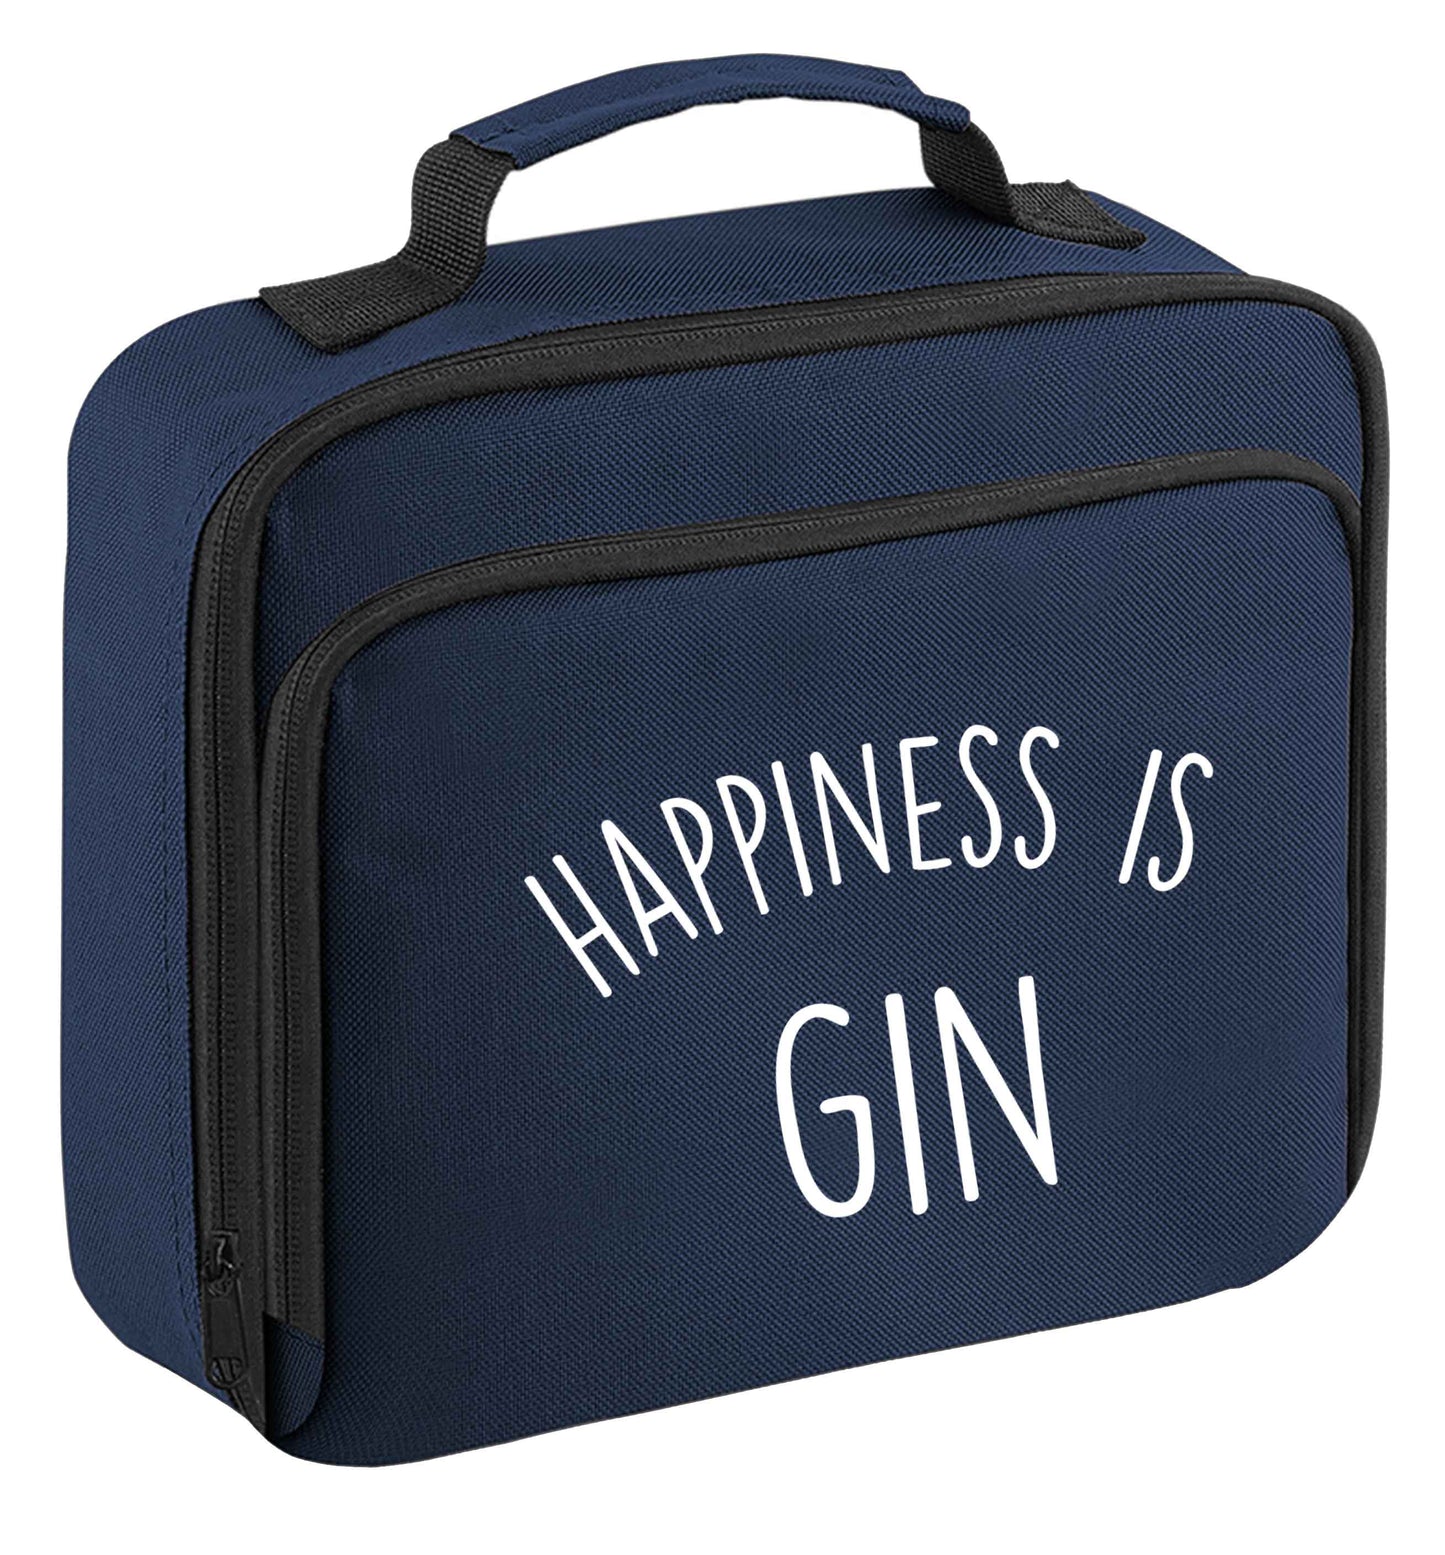 Happiness is gin insulated navy lunch bag cooler